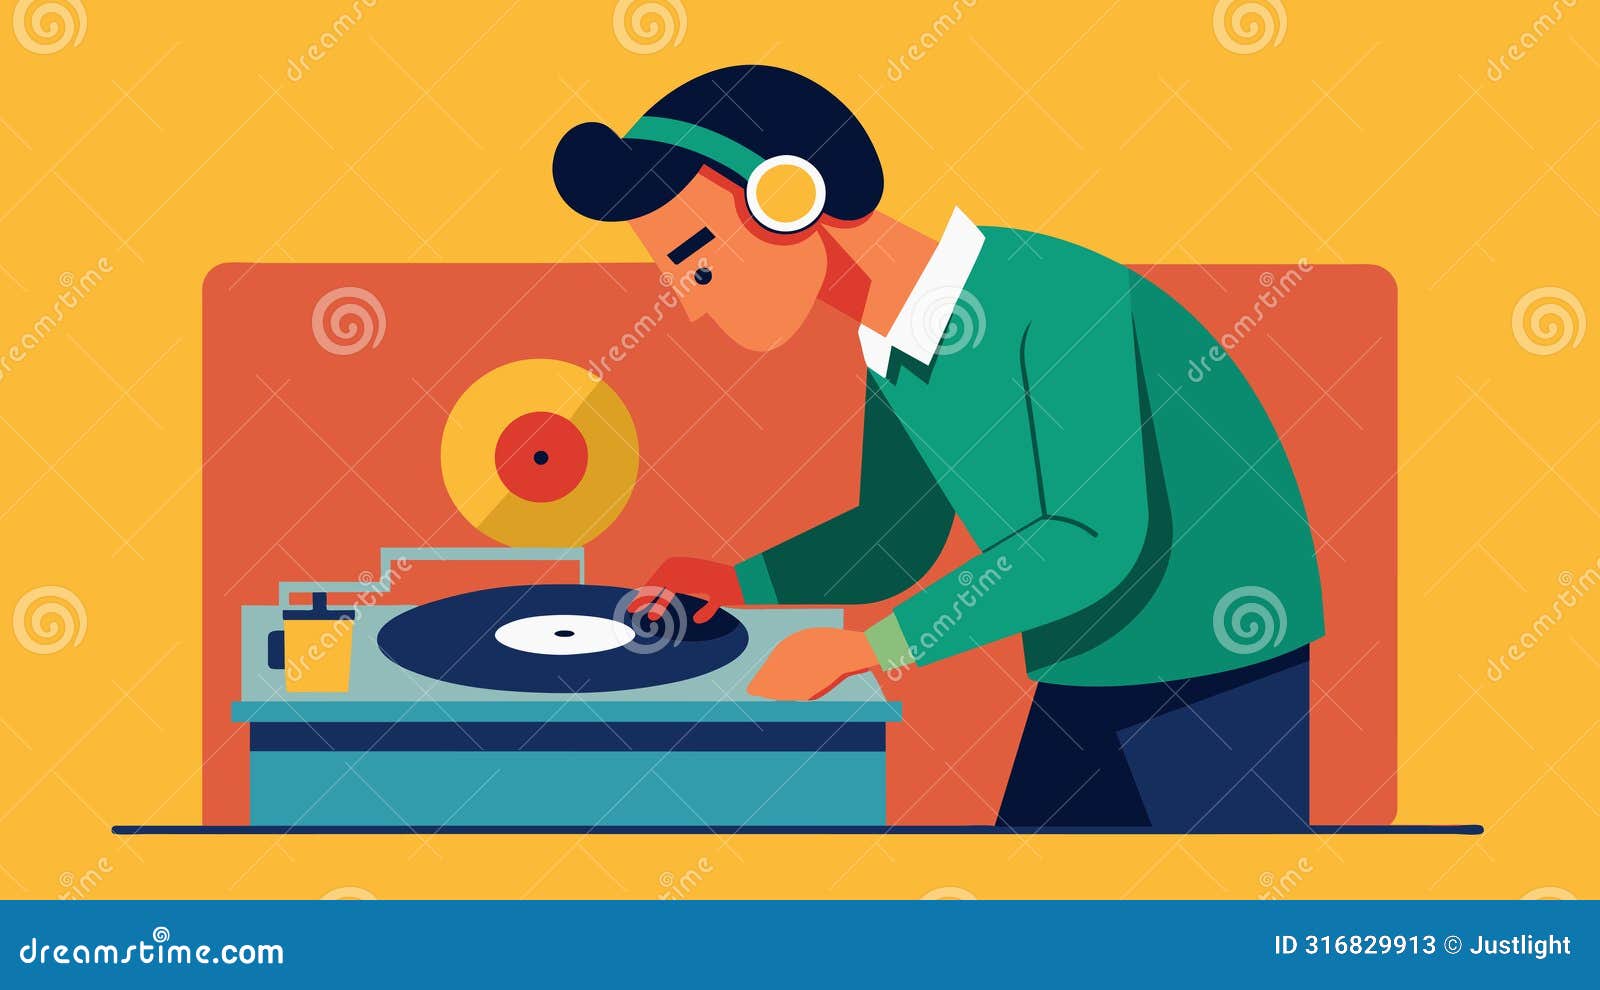 focused and intent a person uses a record cleaning machine to deeply clean each groove of a vinyl record rejuvenating